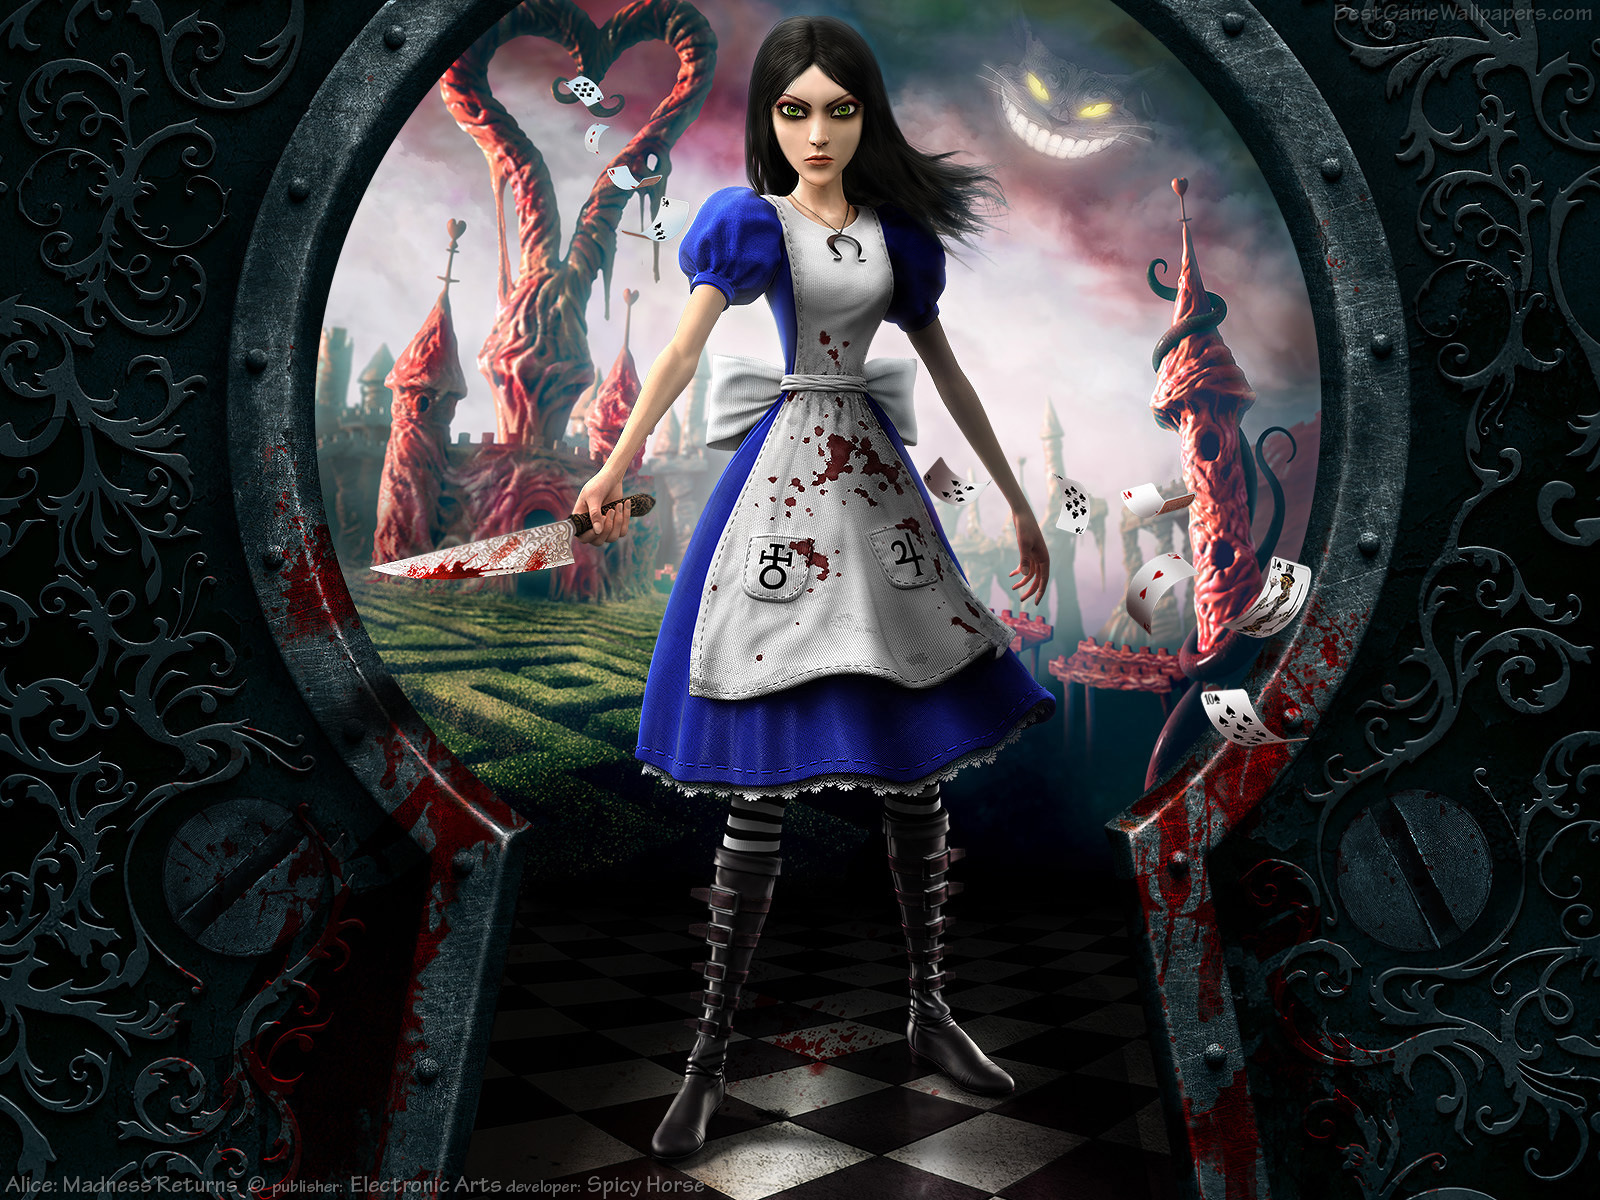 20977 free wallpaper 720x1280 for phone, download images alice: madness returns, games 720x1280 for mobile